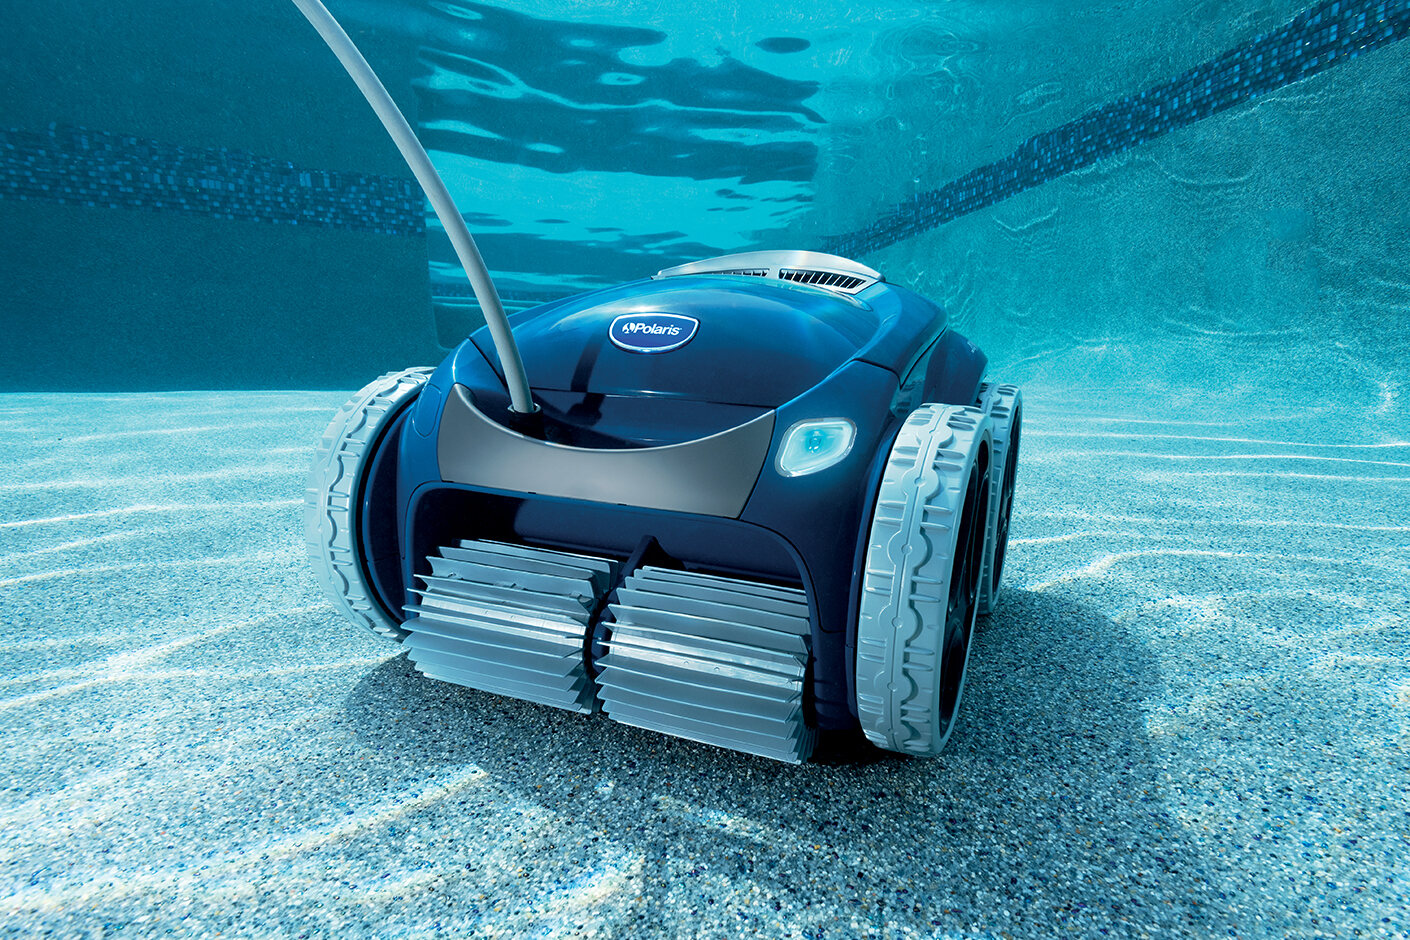 Robotic Pool Cleaner with Energy Efficient Power Source, robotic pool cleaners, pool robotic cleaners